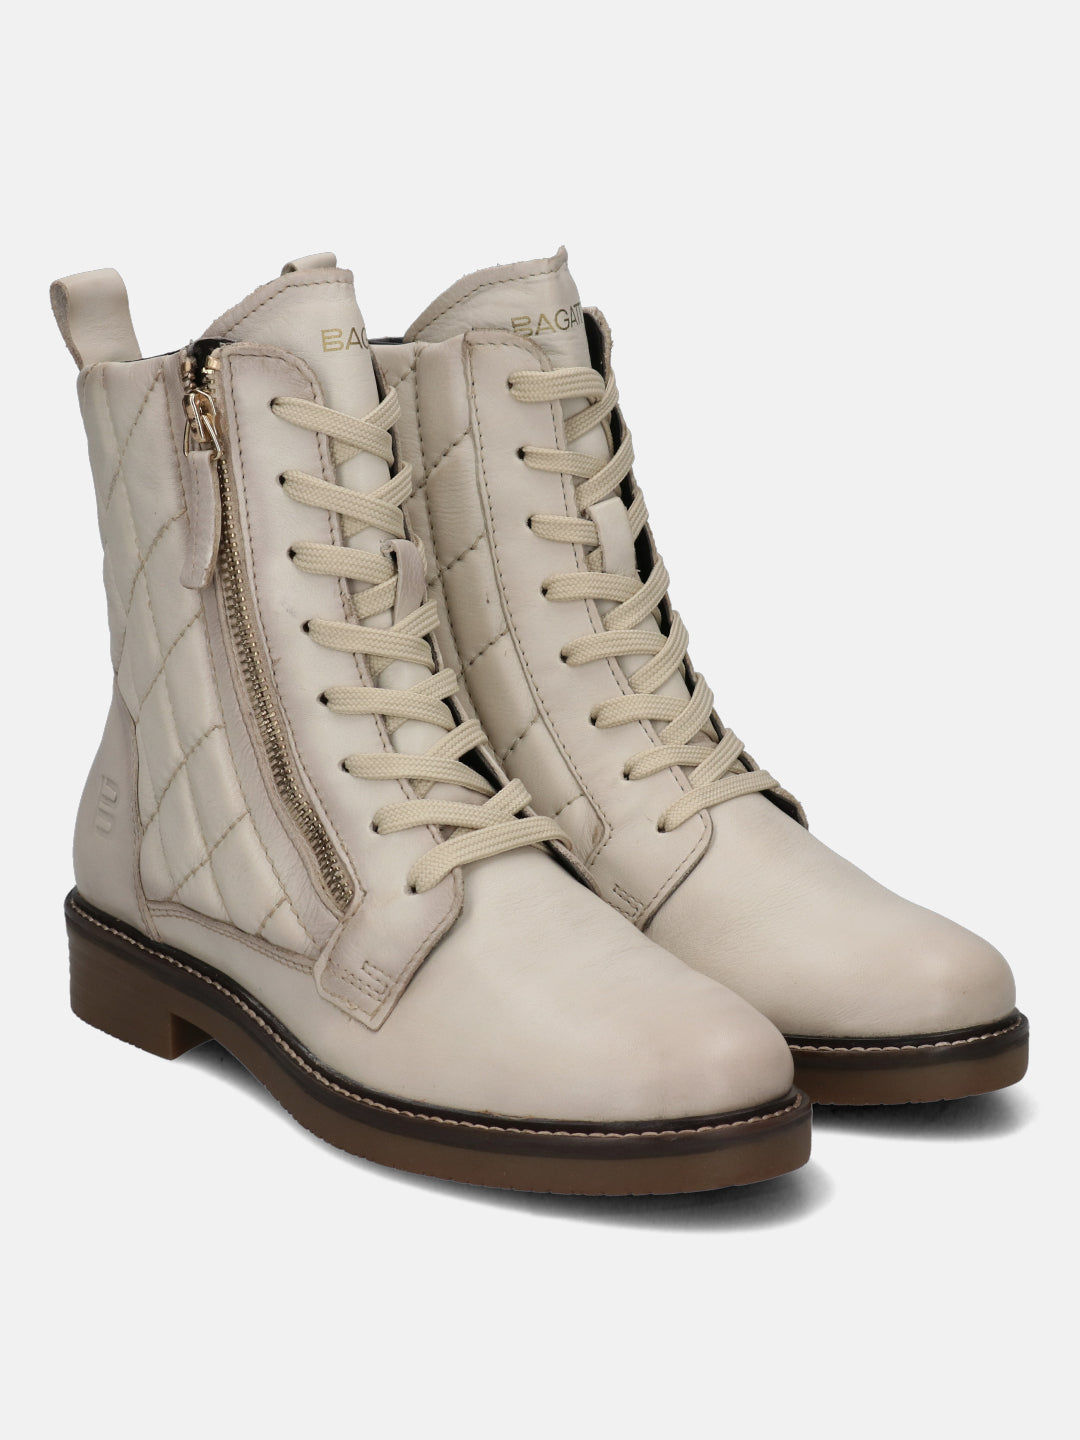 Zina Off White Ankle Boots - BAGATT